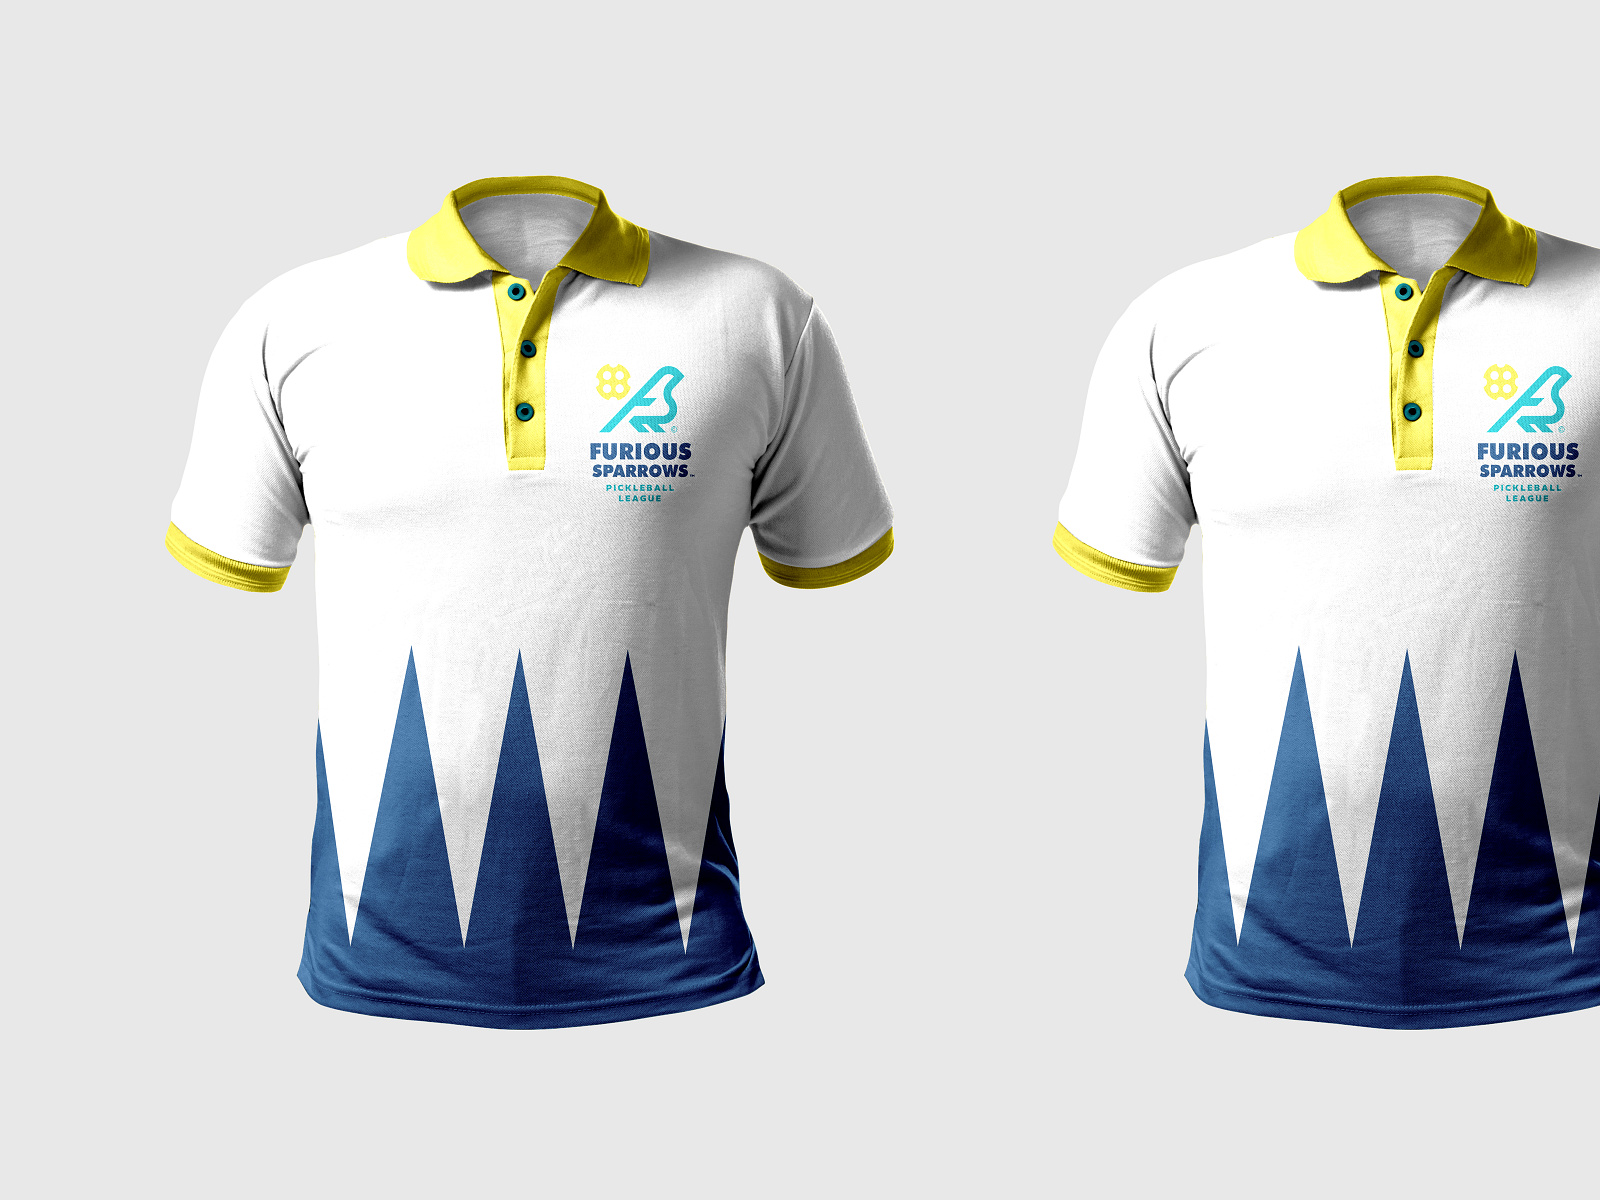 Furious Sparrows Polo by Type08 (Alen Pavlovic) on Dribbble